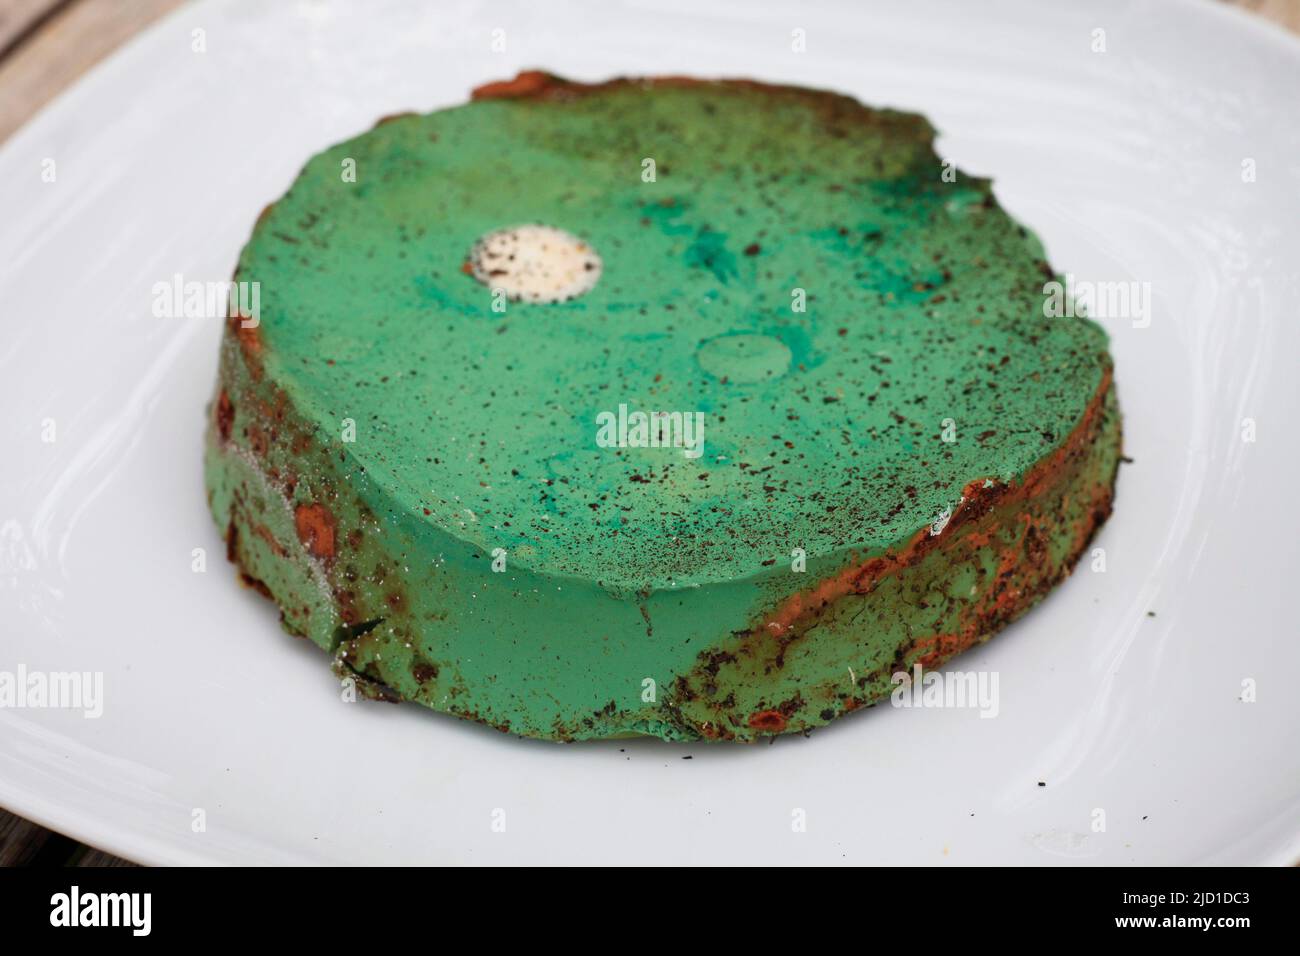 Green cheesecake (actually dried out old paint) Stock Photo